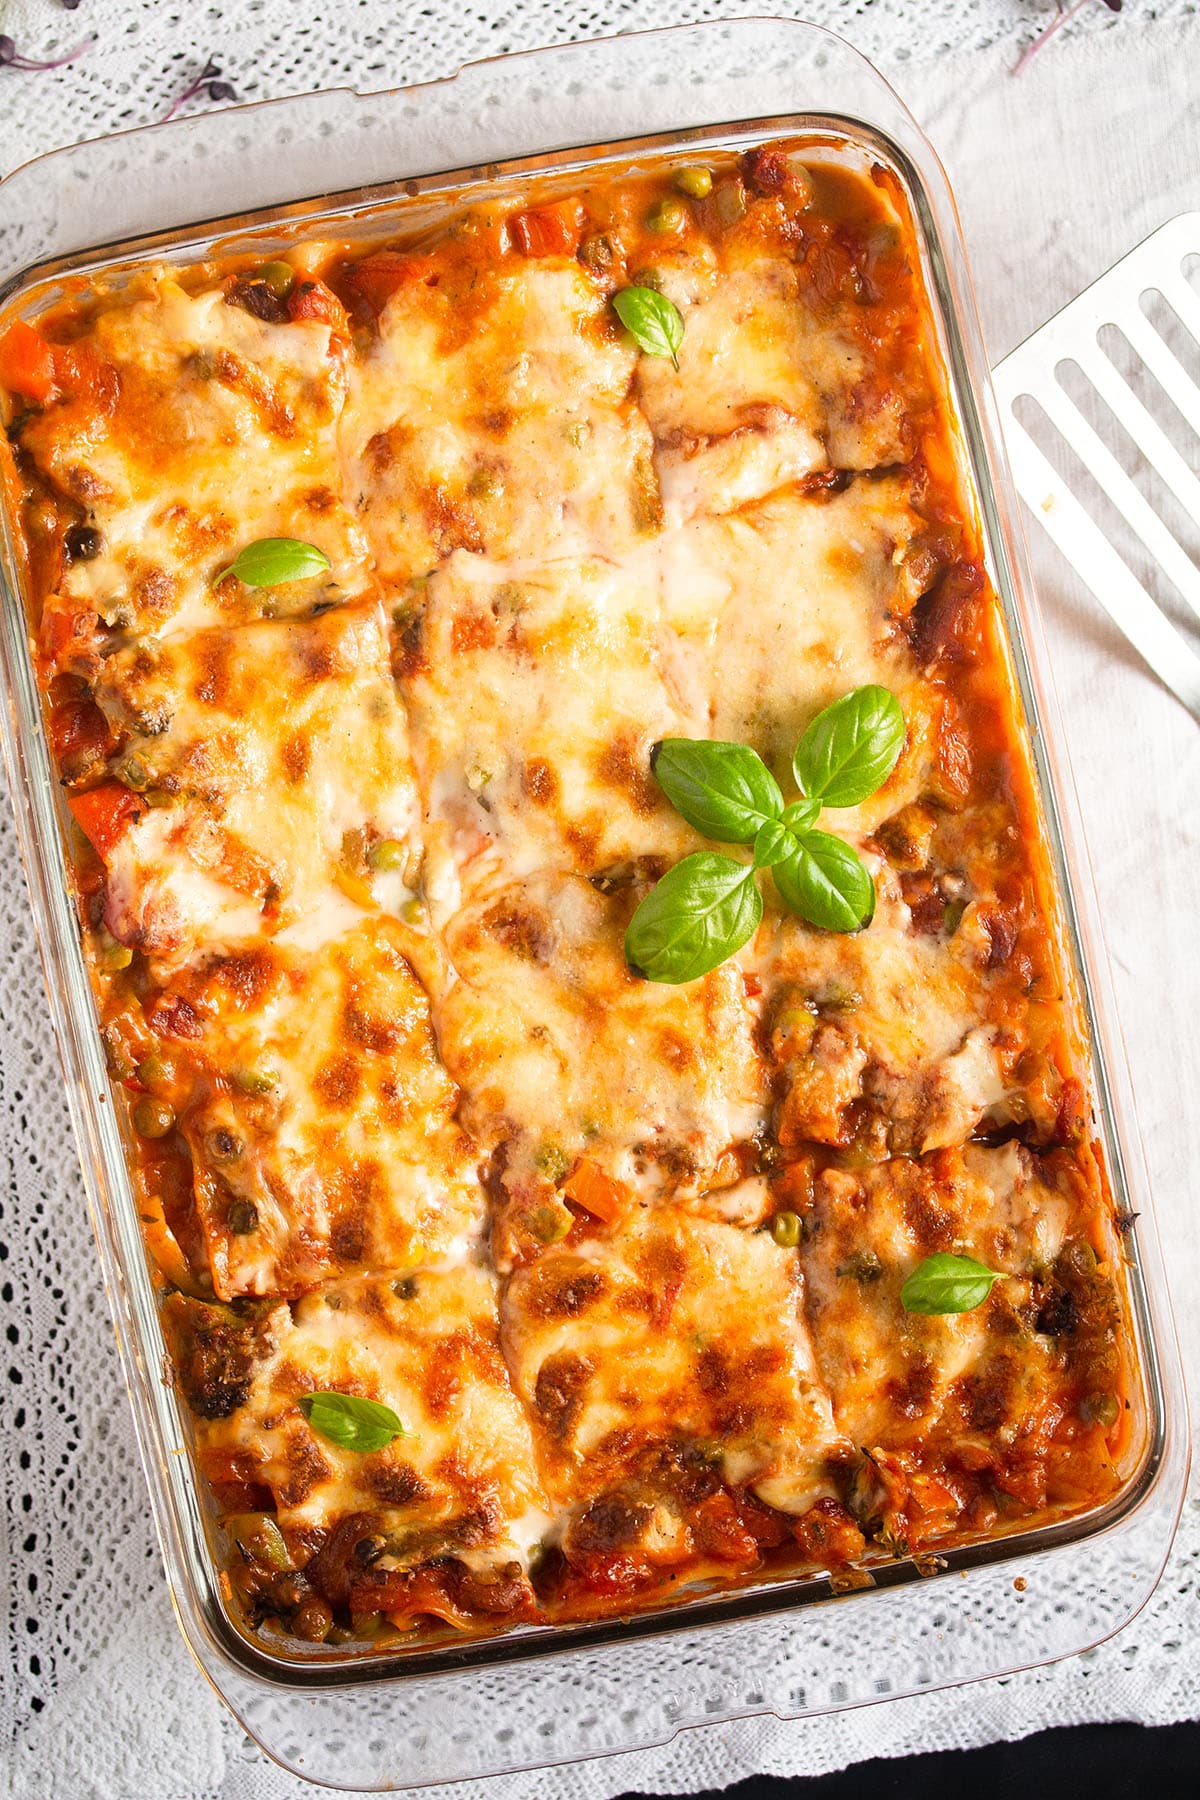 vegetable lasagna with white sauce in a baking dish.